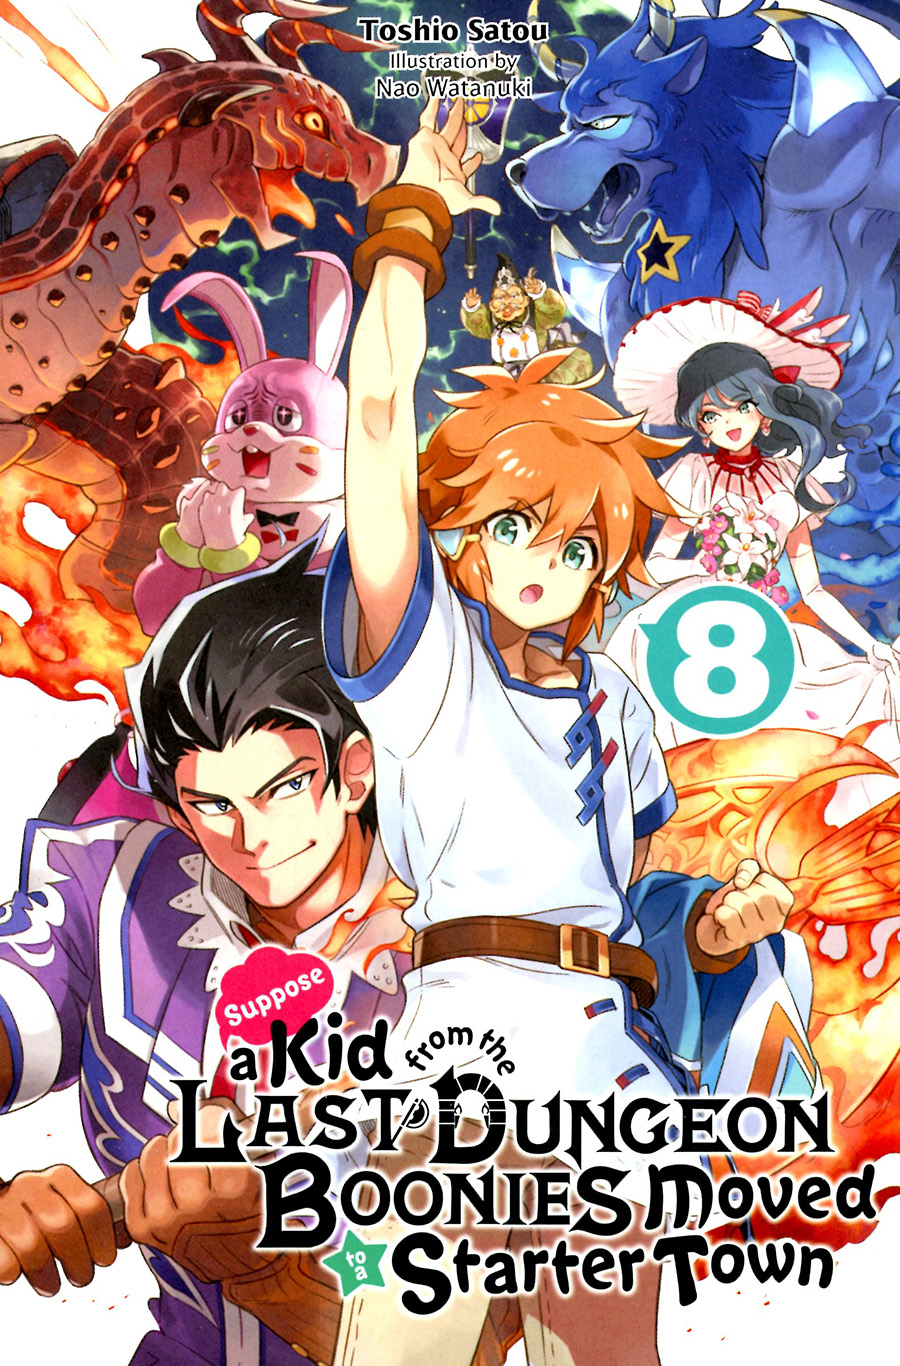 Suppose A Kid From The Last Dungeon Boonies Moved To A Starter Town Light Novel Vol 8